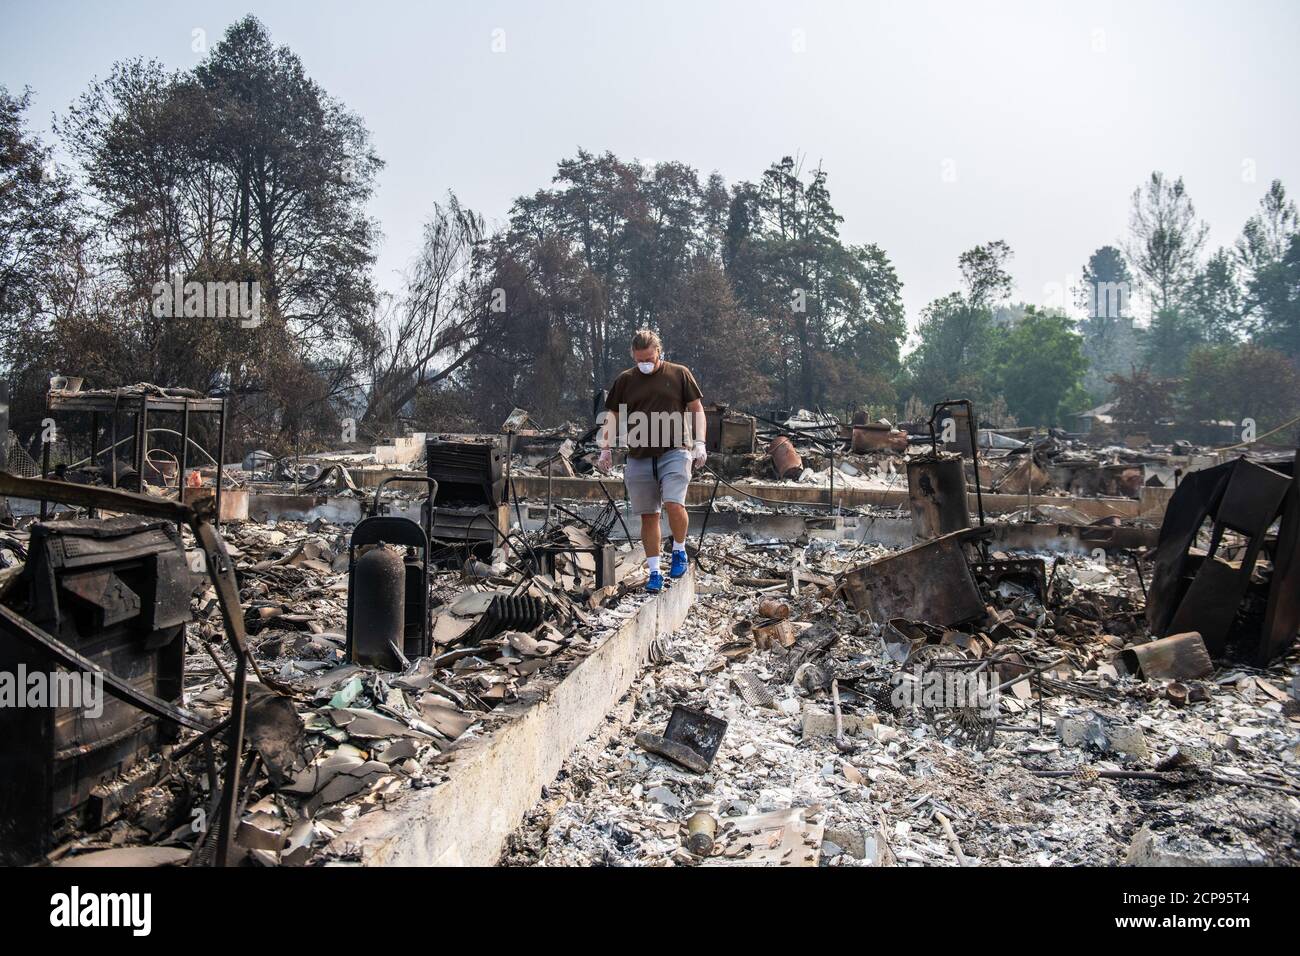 Talent, Ore. 18th Sep, 2020. Zach Kuhlow checks the remnants of his house for anything salvagable. His son, who is now 10, was born inside the house. In Talent, about 20 miles north of the California border, homes were charred beyond recognition. Across the western US, at least 87 wildfires are burning, according to the National Interagency Fire Center. They've torched more than 4.7 million acres -- more than six times the area of Rhode Island. Credit: Chris Tuite/Image Space/Media Punch/Alamy Live News Stock Photo